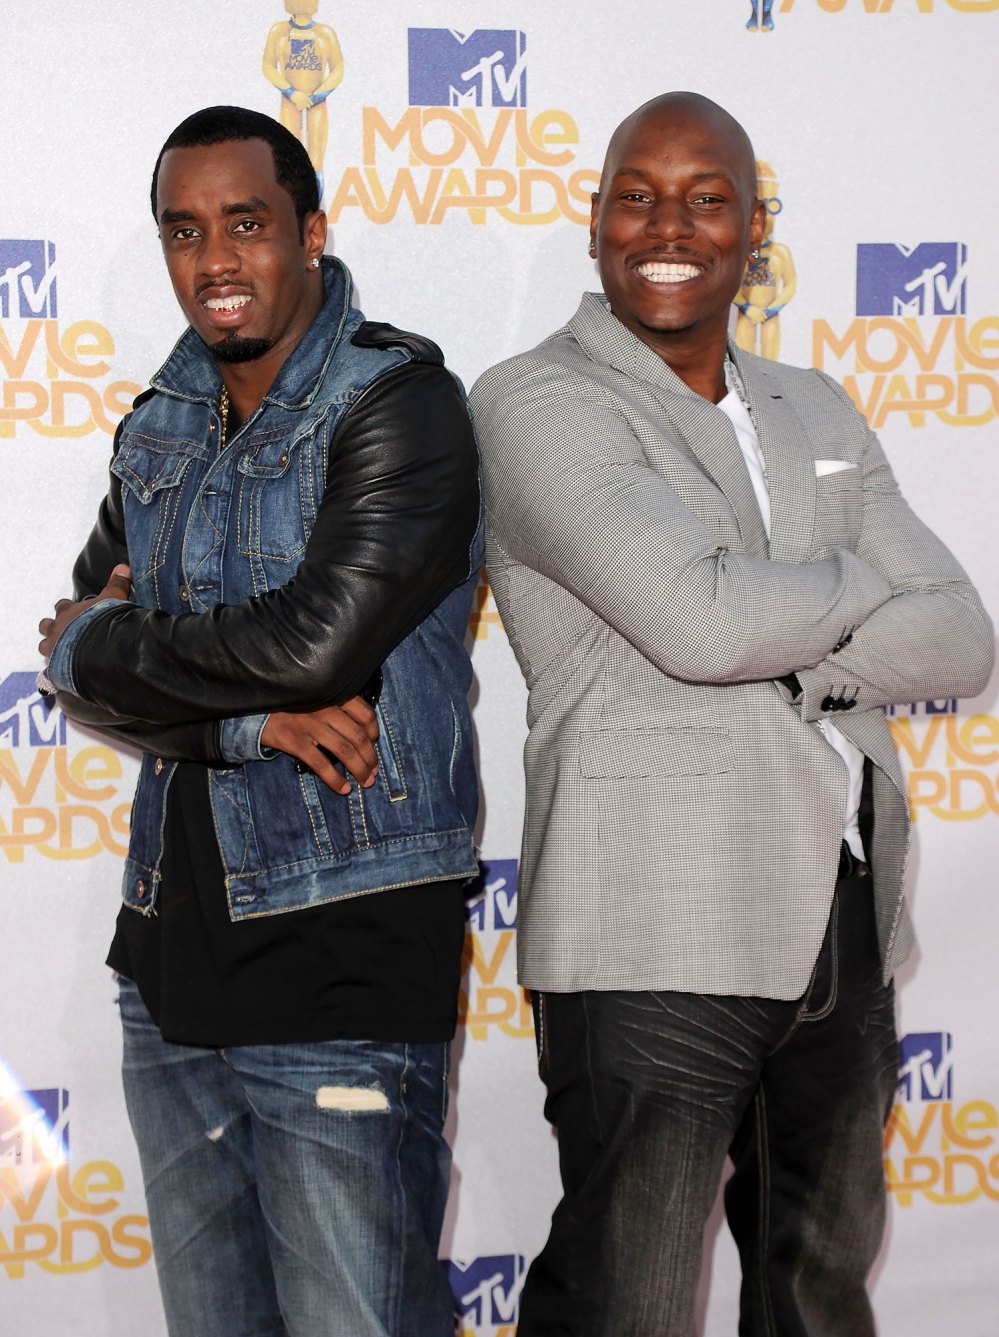 Tyrese Is Praying for More of a Better Outcome for Diddy Amid Legal Issues